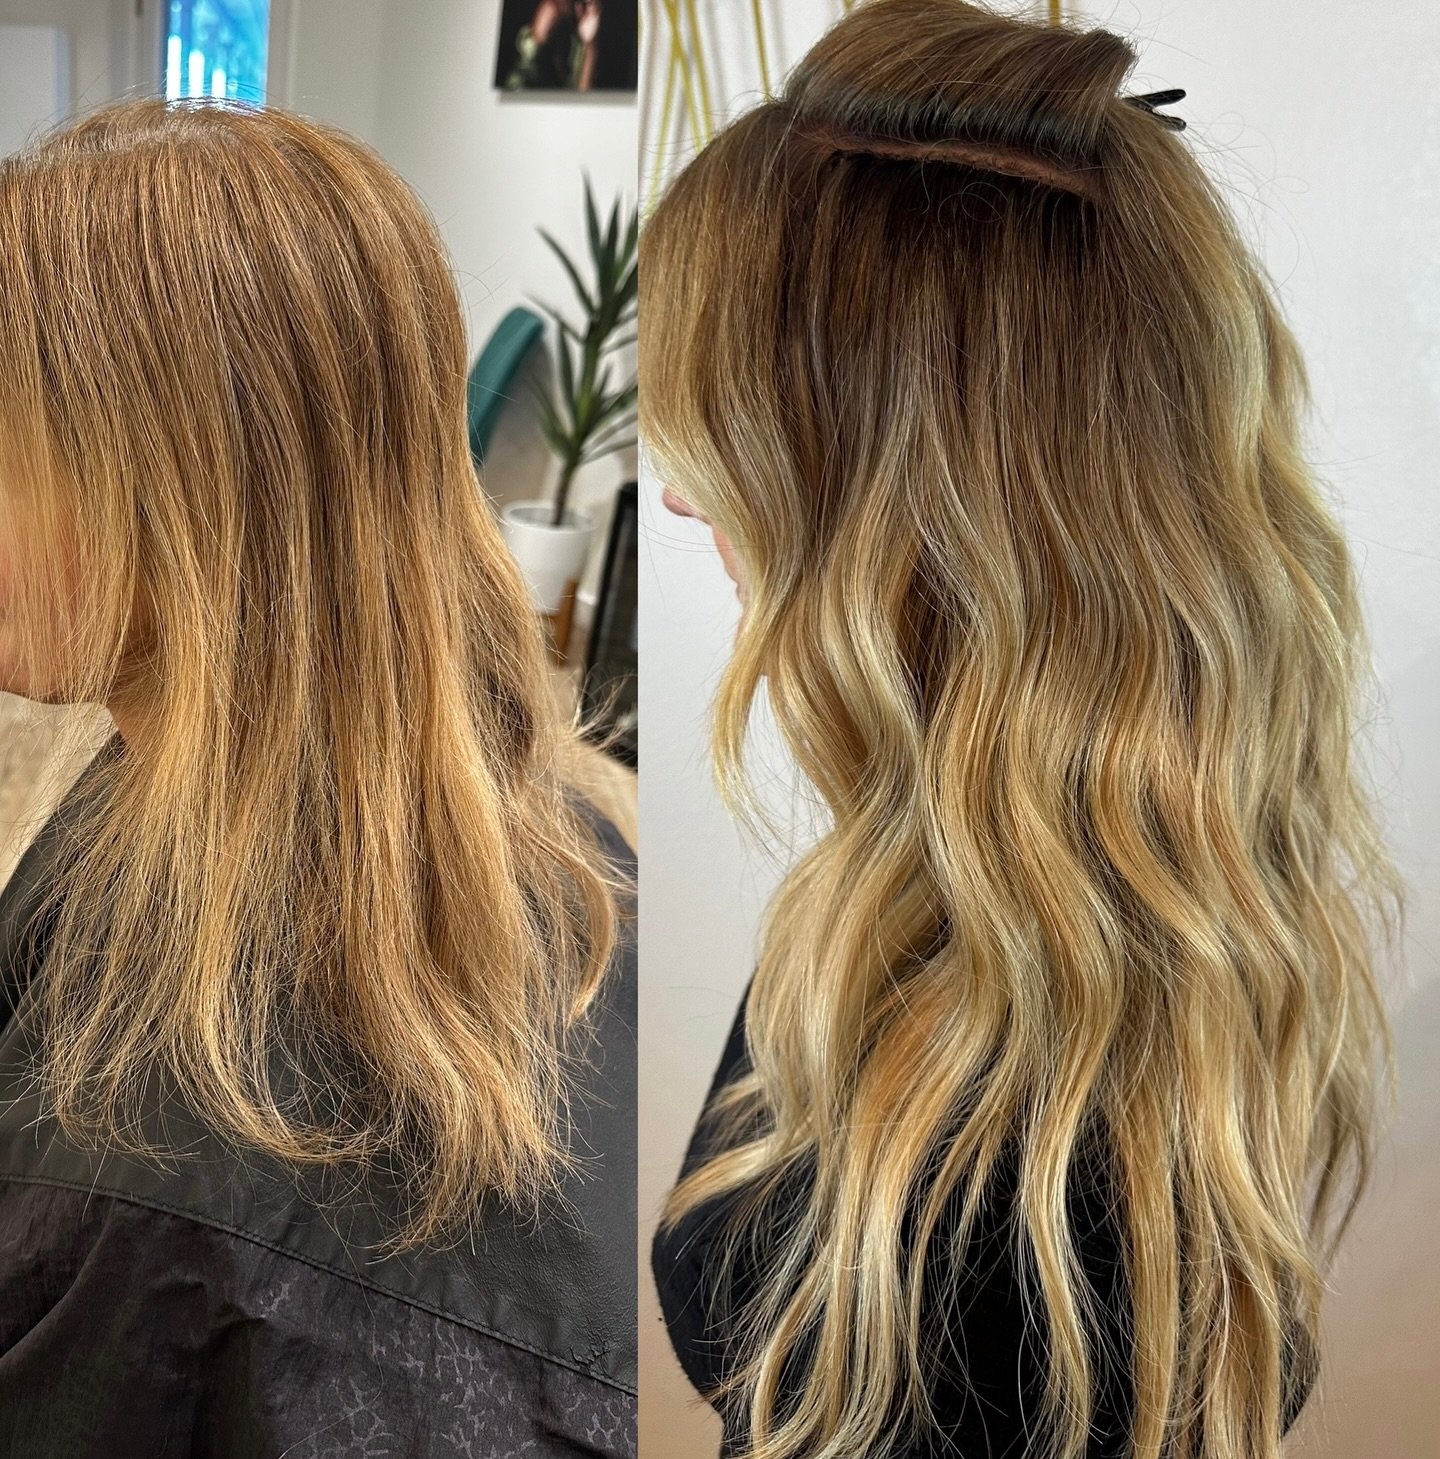 Does it get much better than this?
Two rows of #invisiblebeadextensions for the ultimate hair makeover.